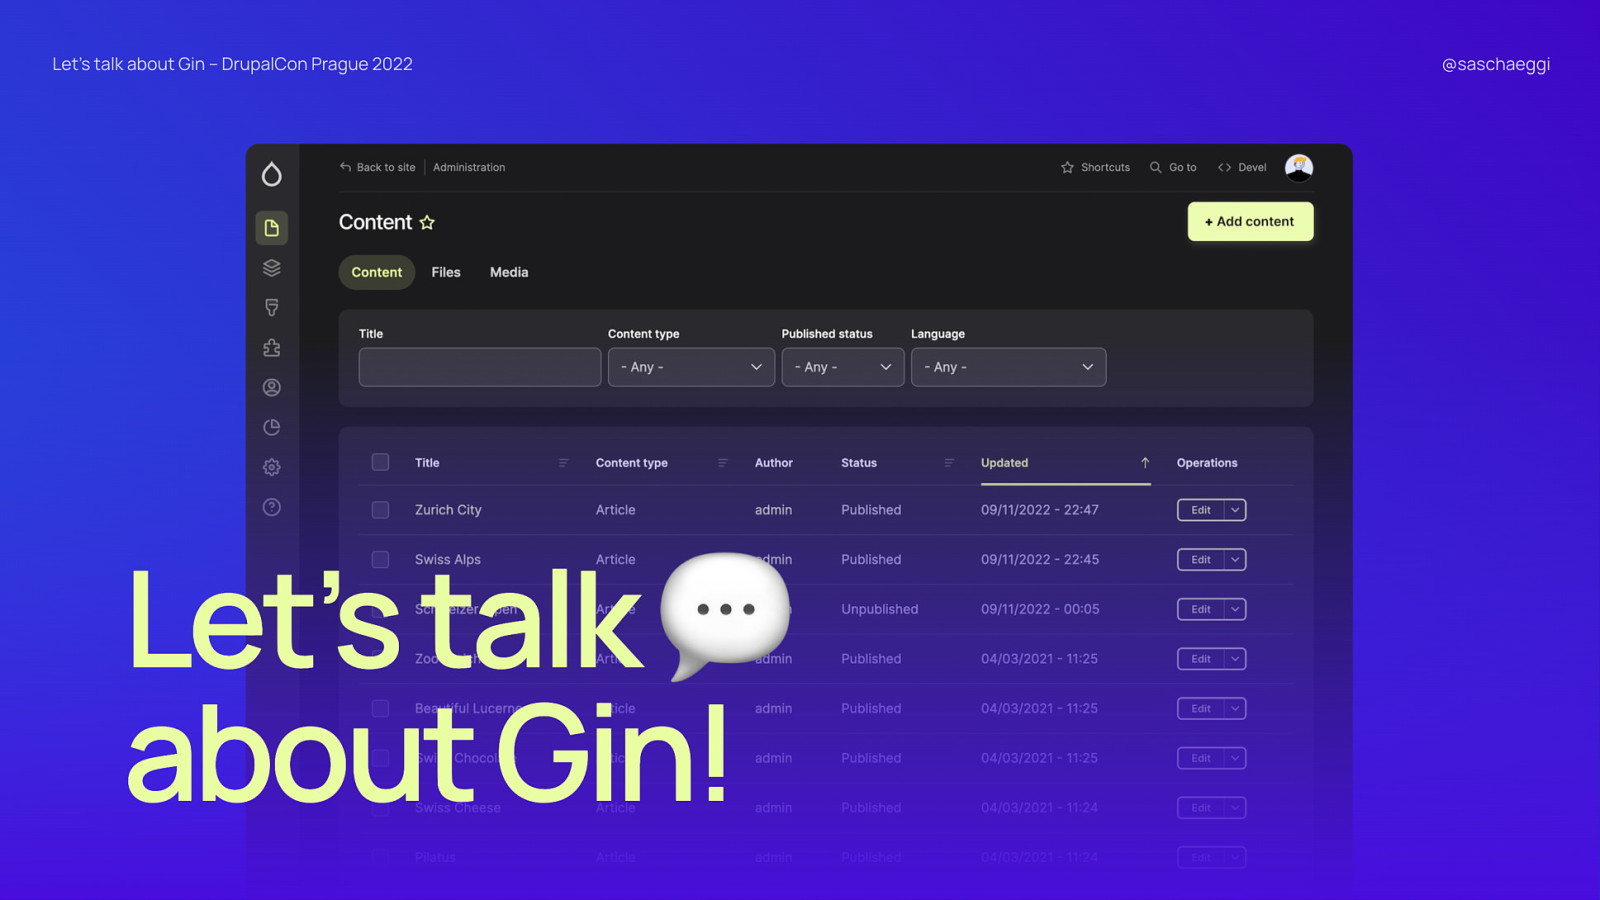 Let’s talk about Gin! by Sascha Eggenberger